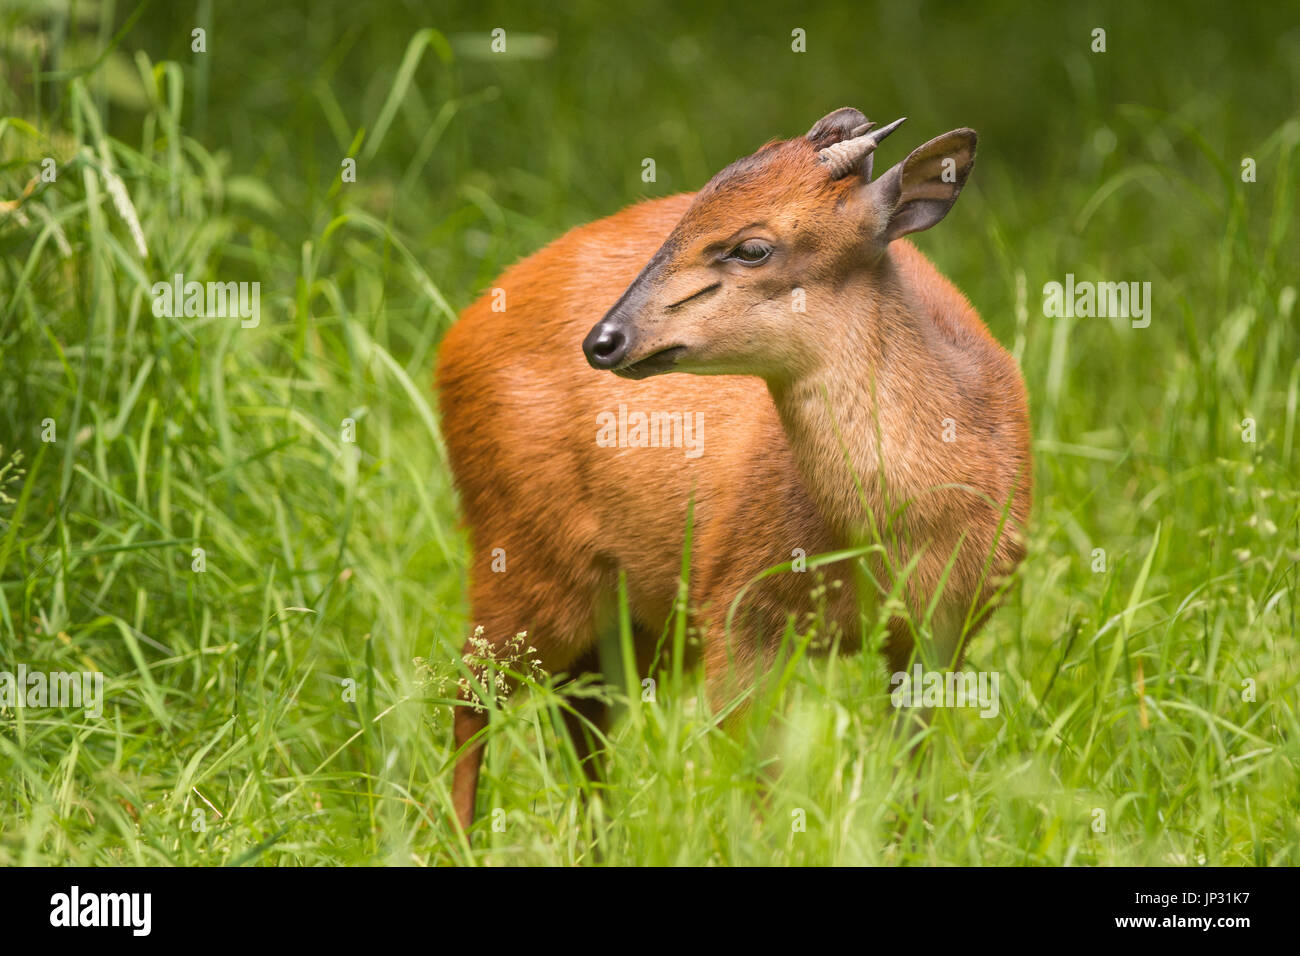 Red Forest Duiker in a grassy field Stock Photo